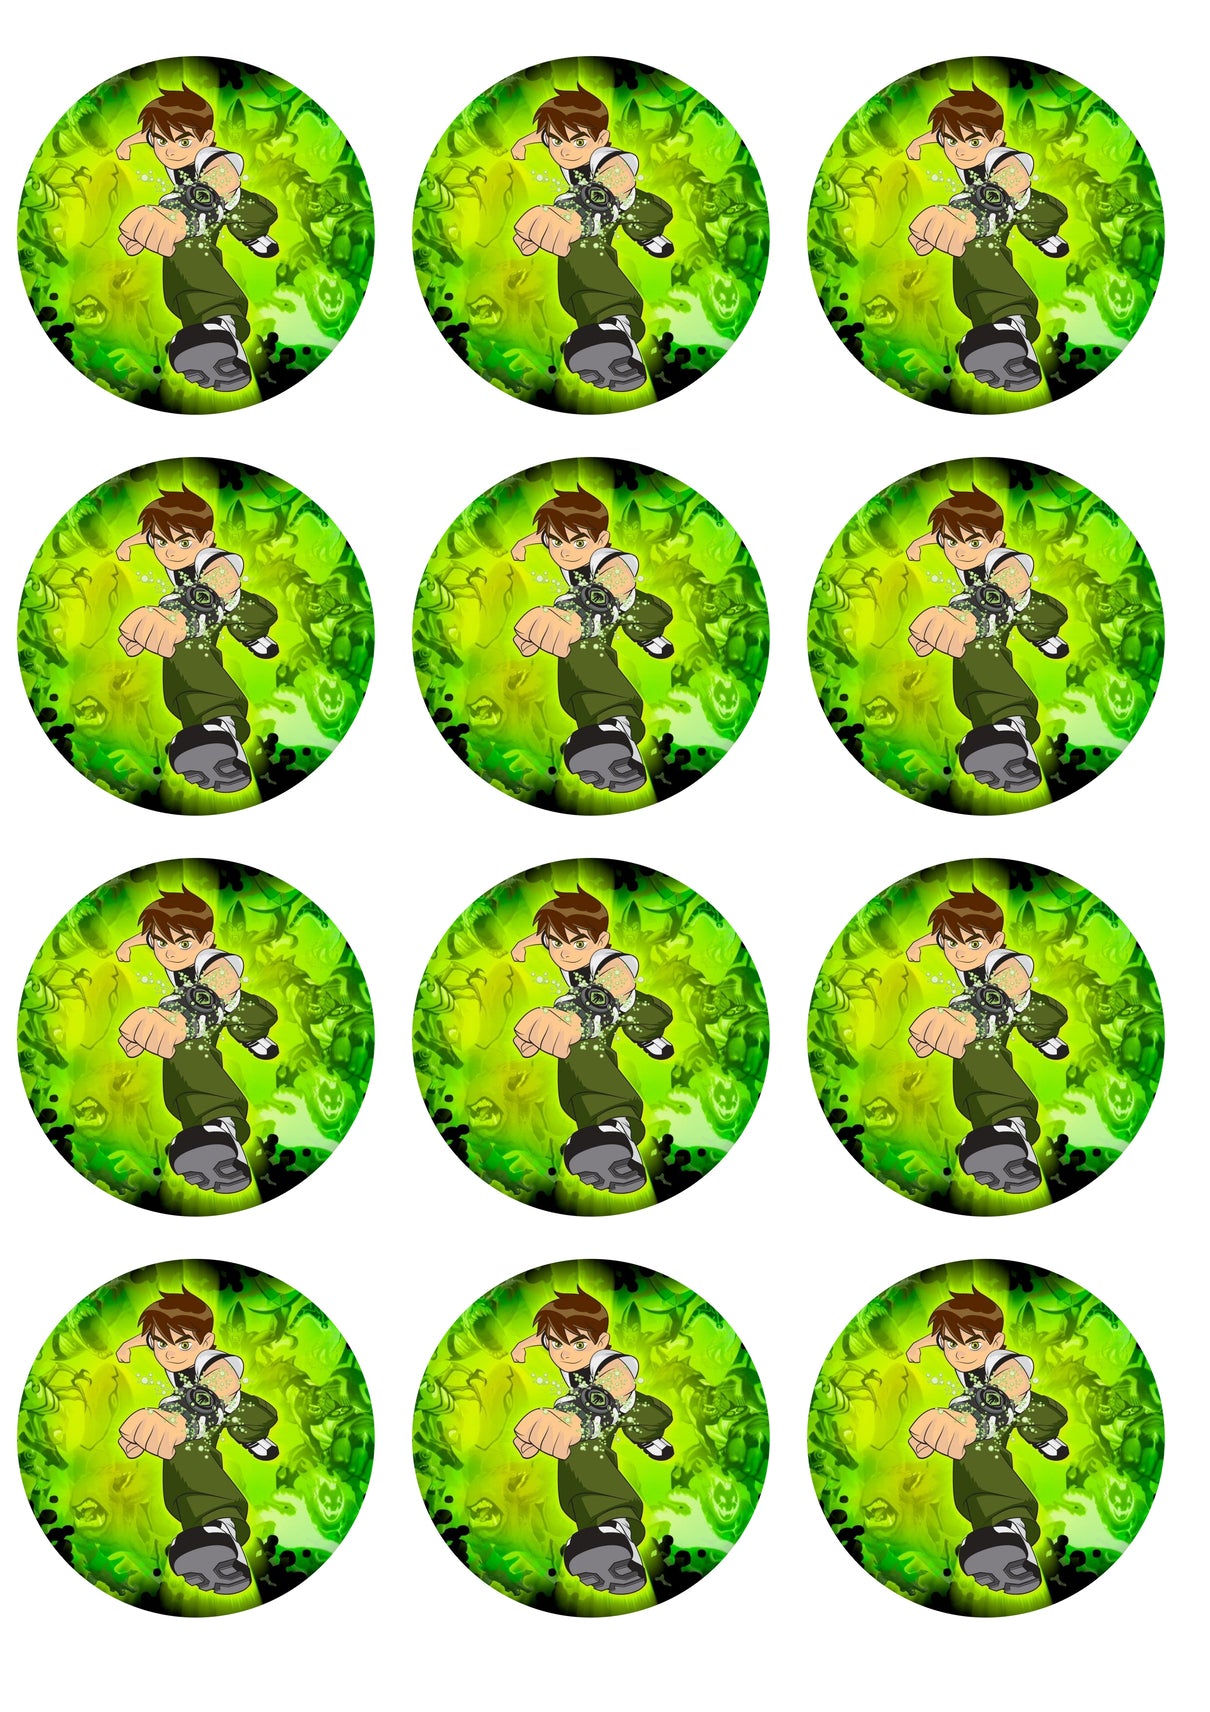 Ben 10 Green Background Edible Cupcake Topper Images ABPID14783